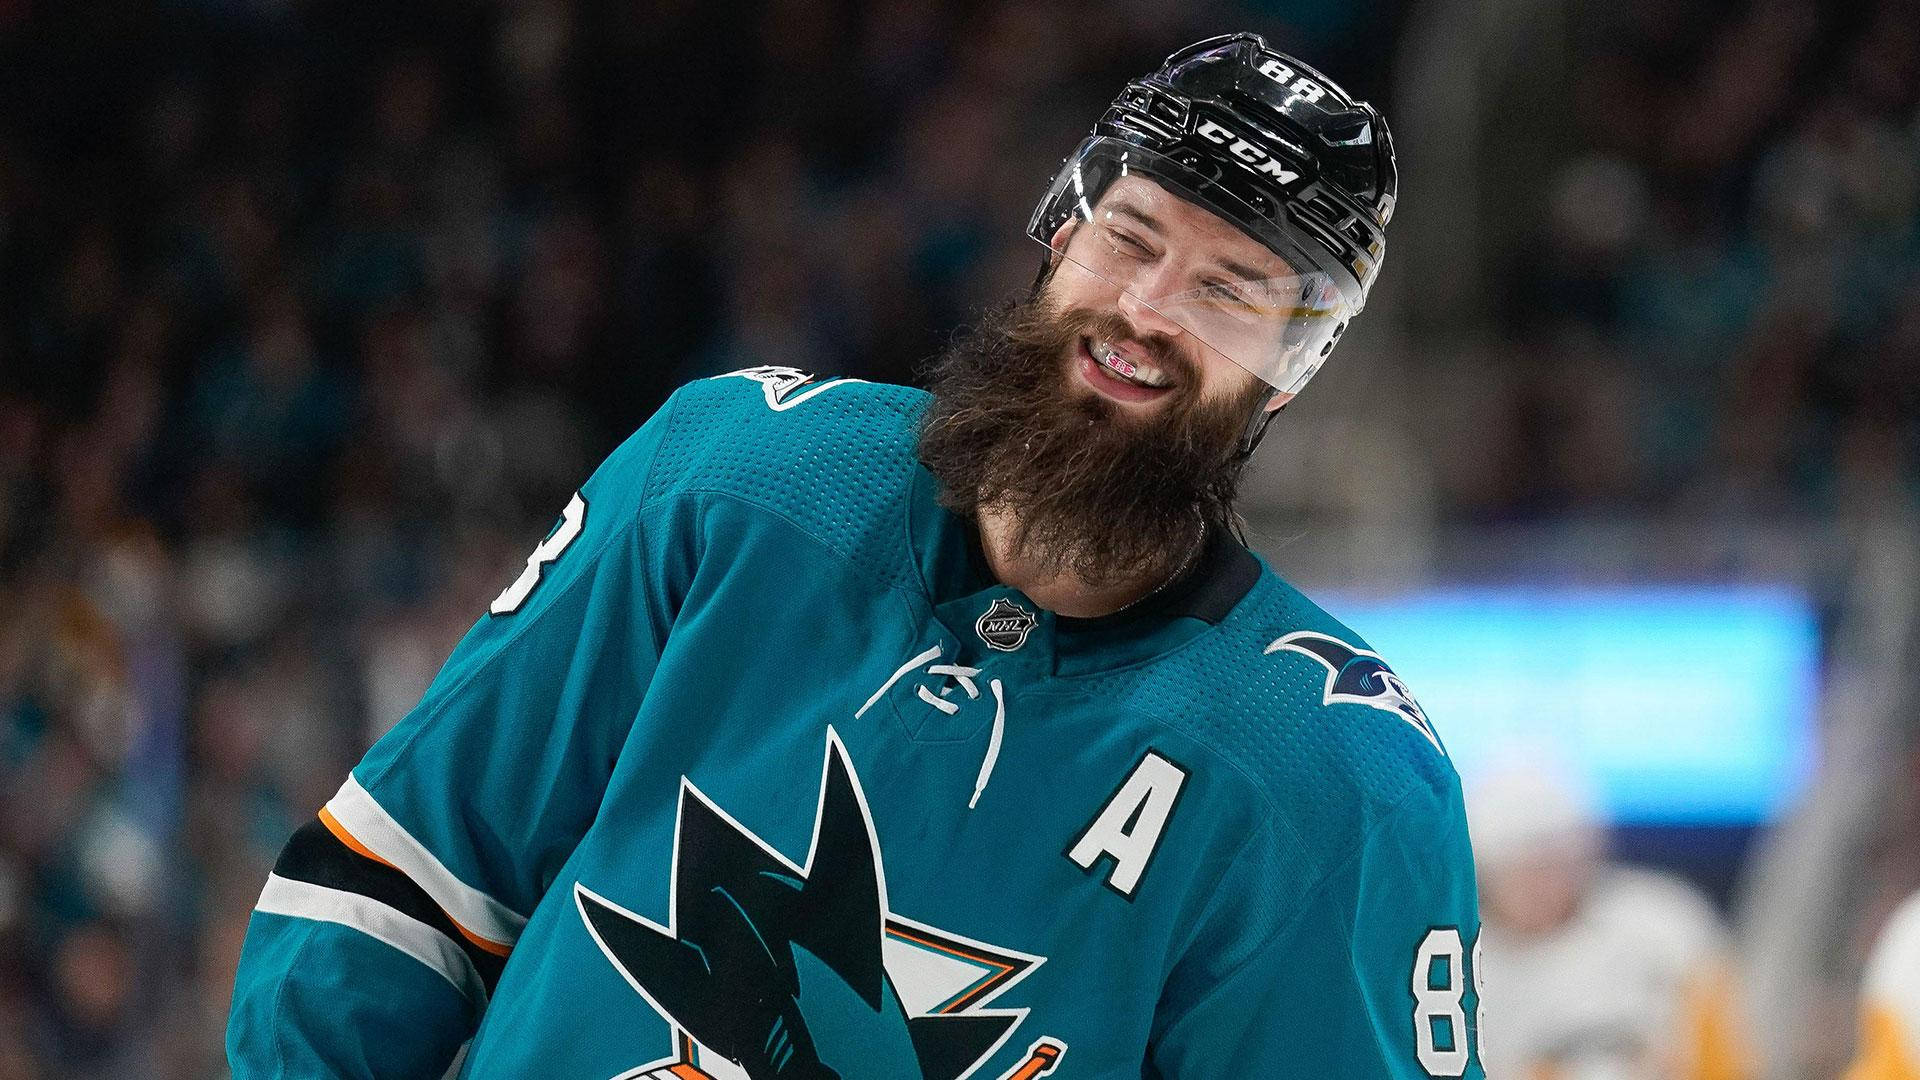 Brent Burns Laughing With Braces Wallpaper